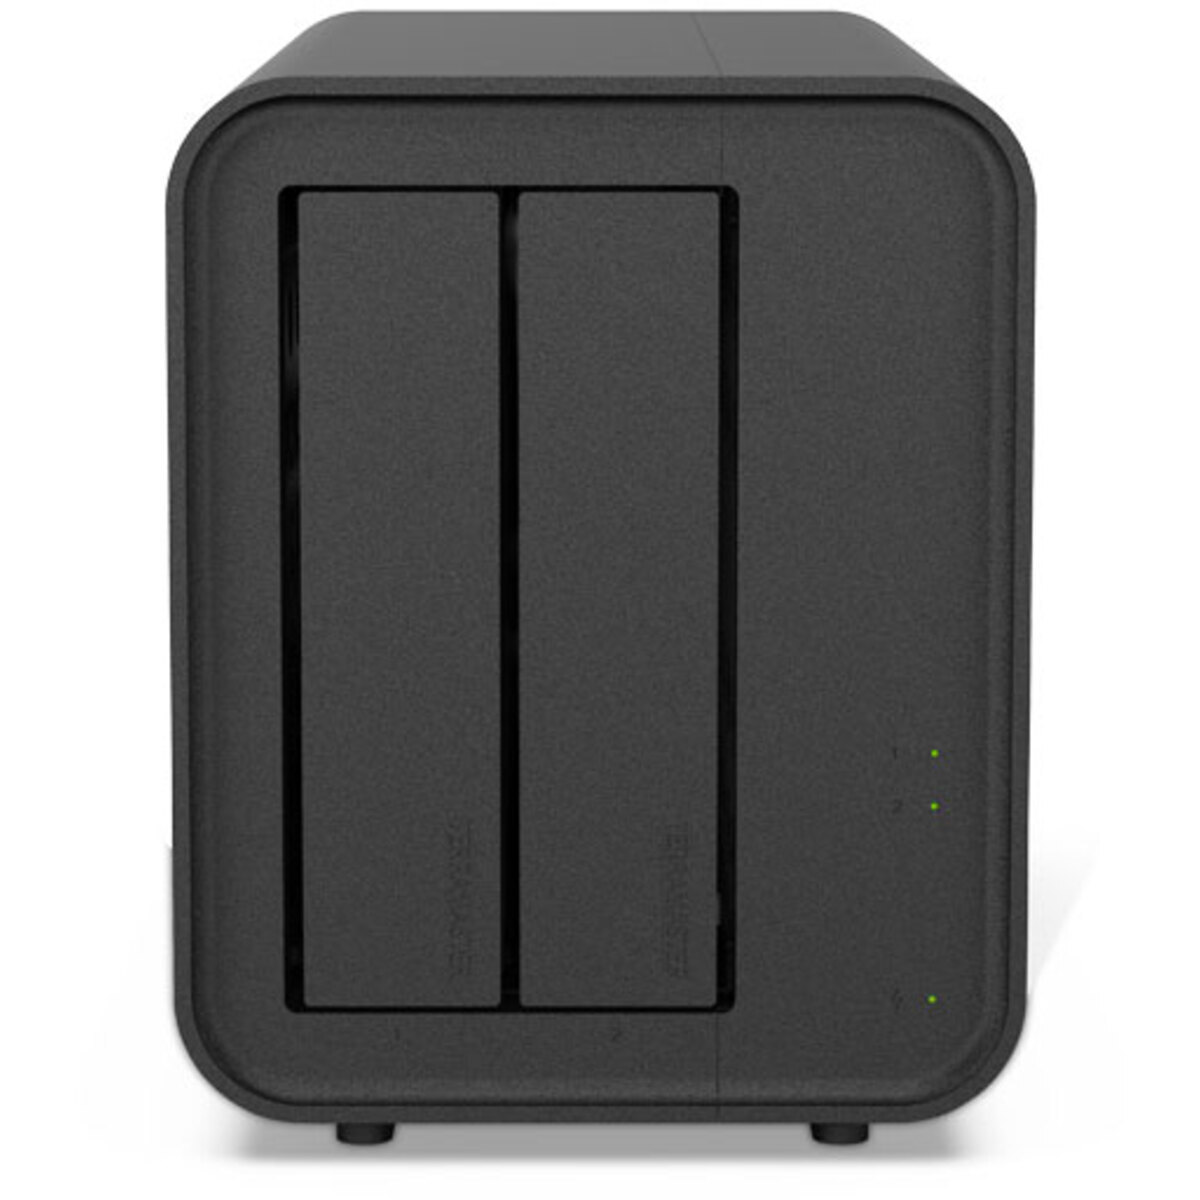 TerraMaster D5 Hybrid 24tb 2-Bay Desktop Multimedia / Power User / Business DAS - Direct Attached Storage Device 1x24tb Seagate IronWolf Pro ST24000NT002 3.5 7200rpm SATA 6Gb/s HDD NAS Class Drives Installed - Burn-In Tested D5 Hybrid